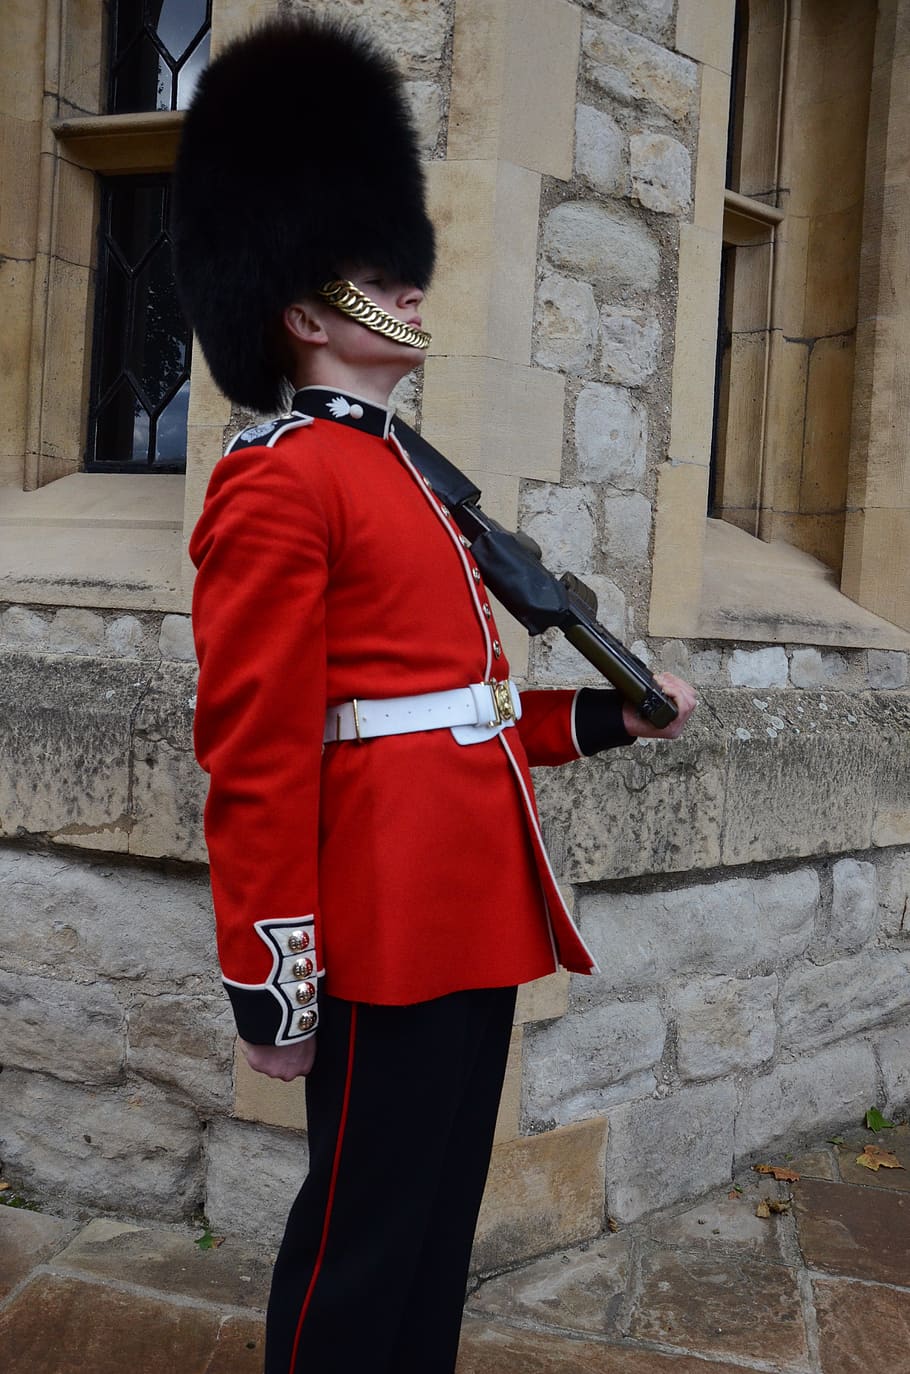 soldier, queen, england, london, europe, london tourism, soldier of the queen, soldier from london, royal guard, the queen's guard